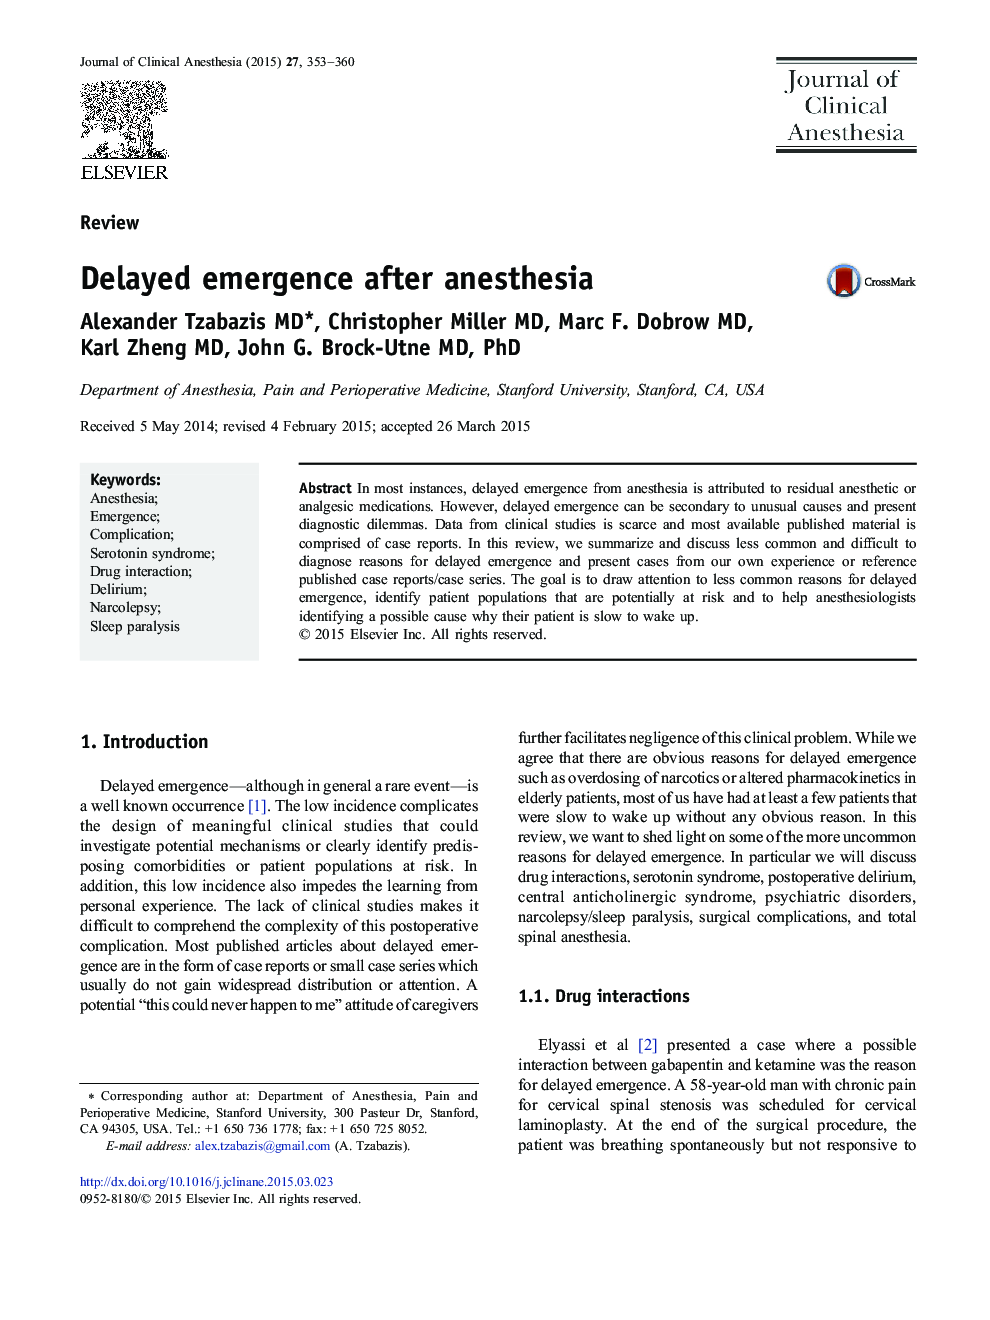 Delayed emergence after anesthesia